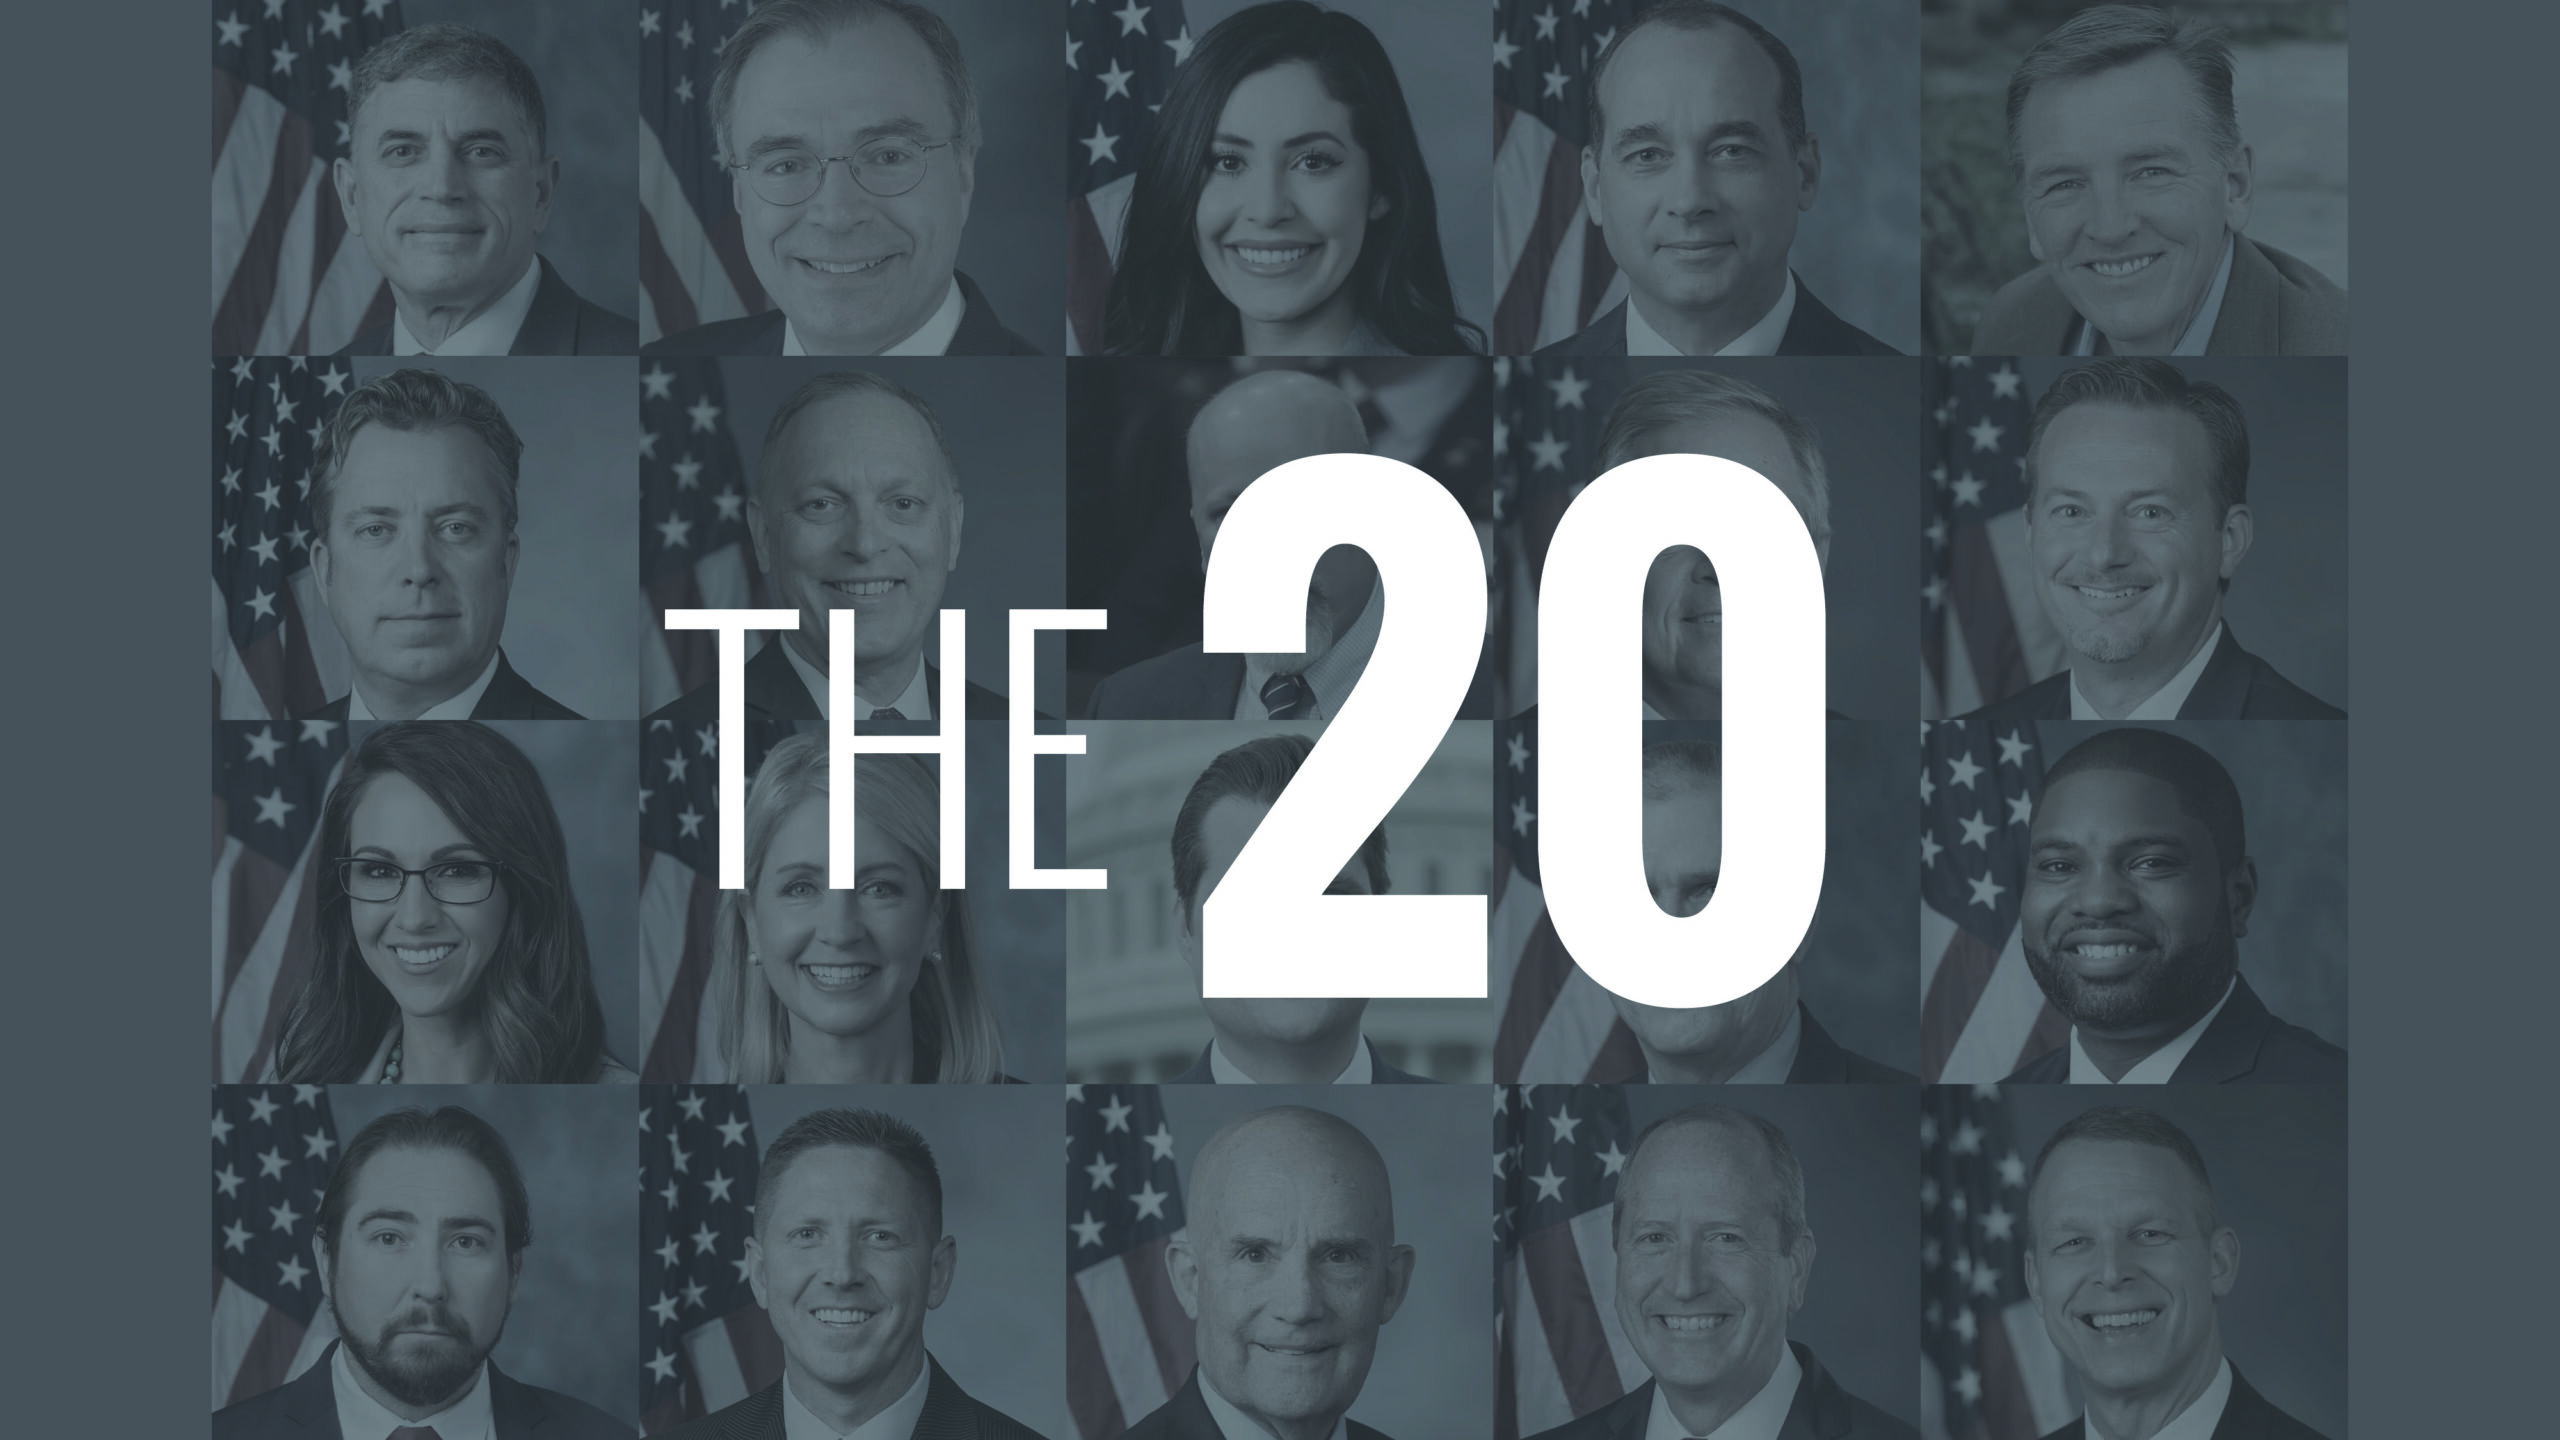 Flashback: 20 Lawmakers Stood Up to the Washington Establishment. This is Their Story.